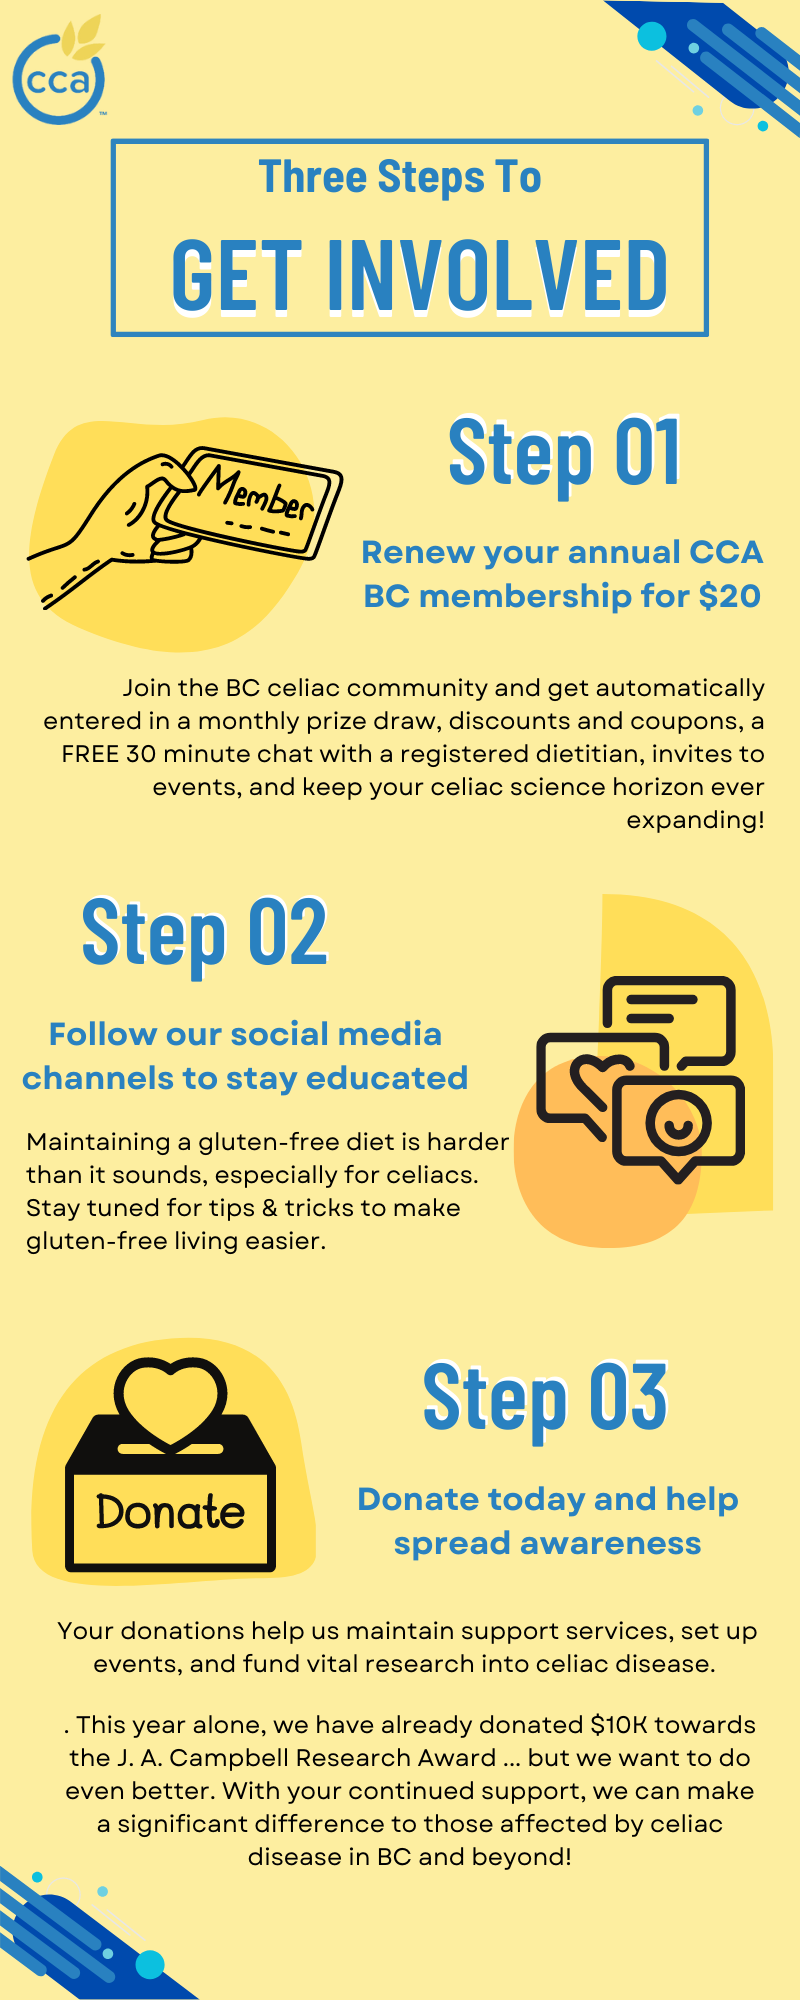 Three steps to get involved. `Step 1: Renew your annual CCA BC membership for $20. Step 2: Follow our social media channels to stay educated. Step 03: Donate today and help spread awareness.